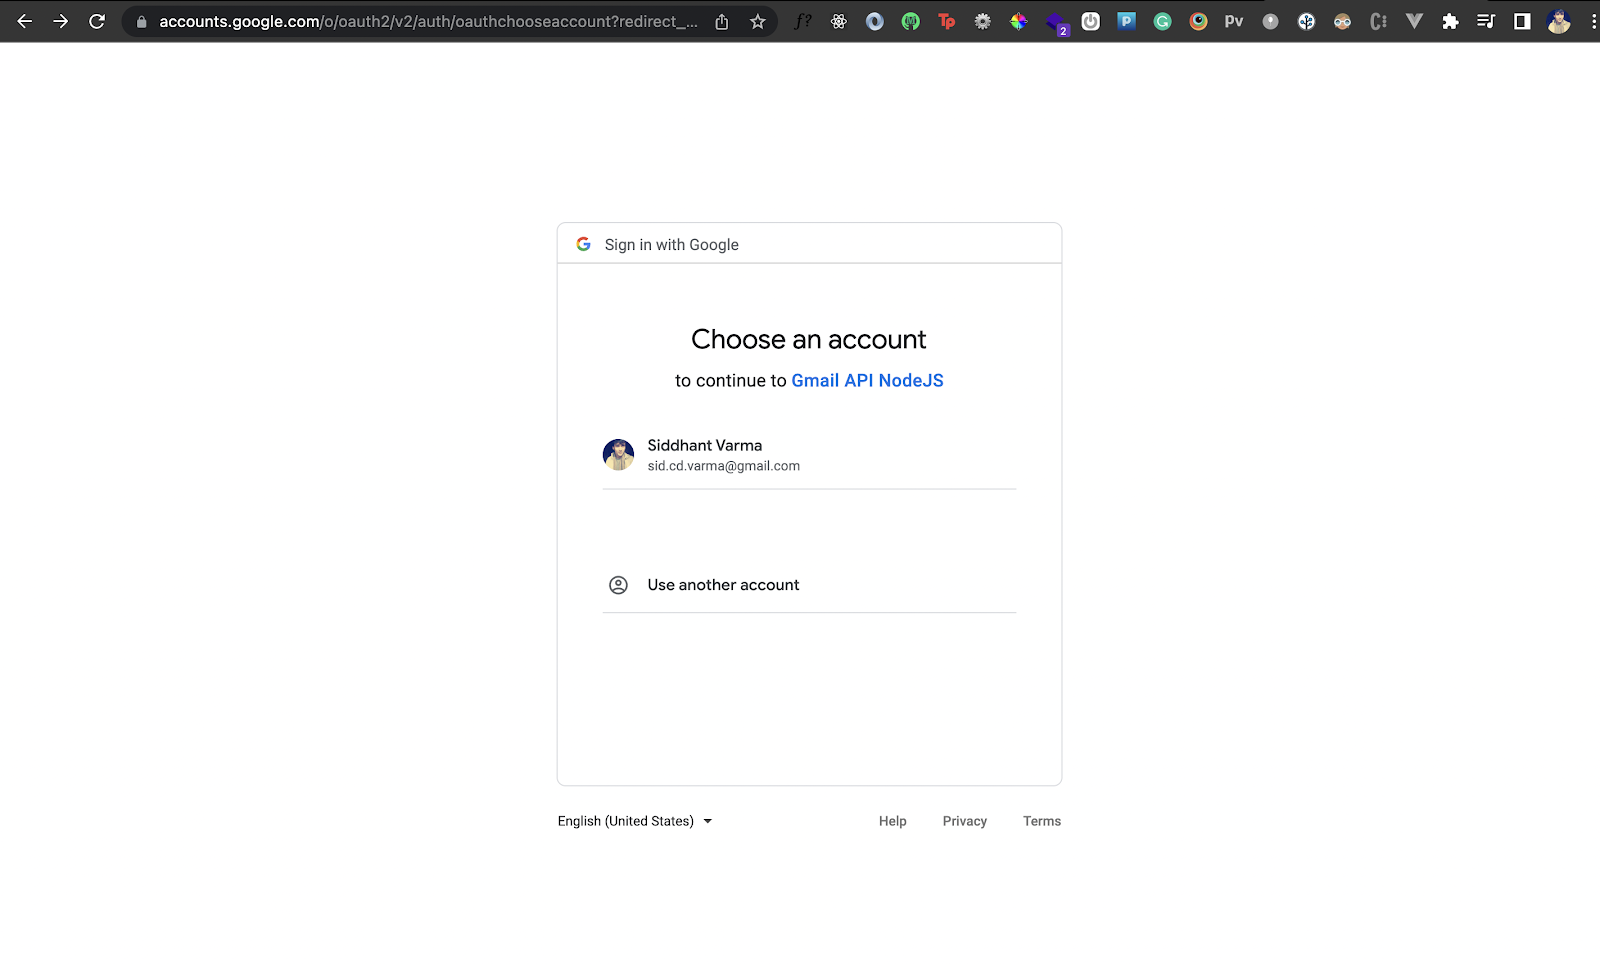 Gmail API in Node.js tutorial with-shadow